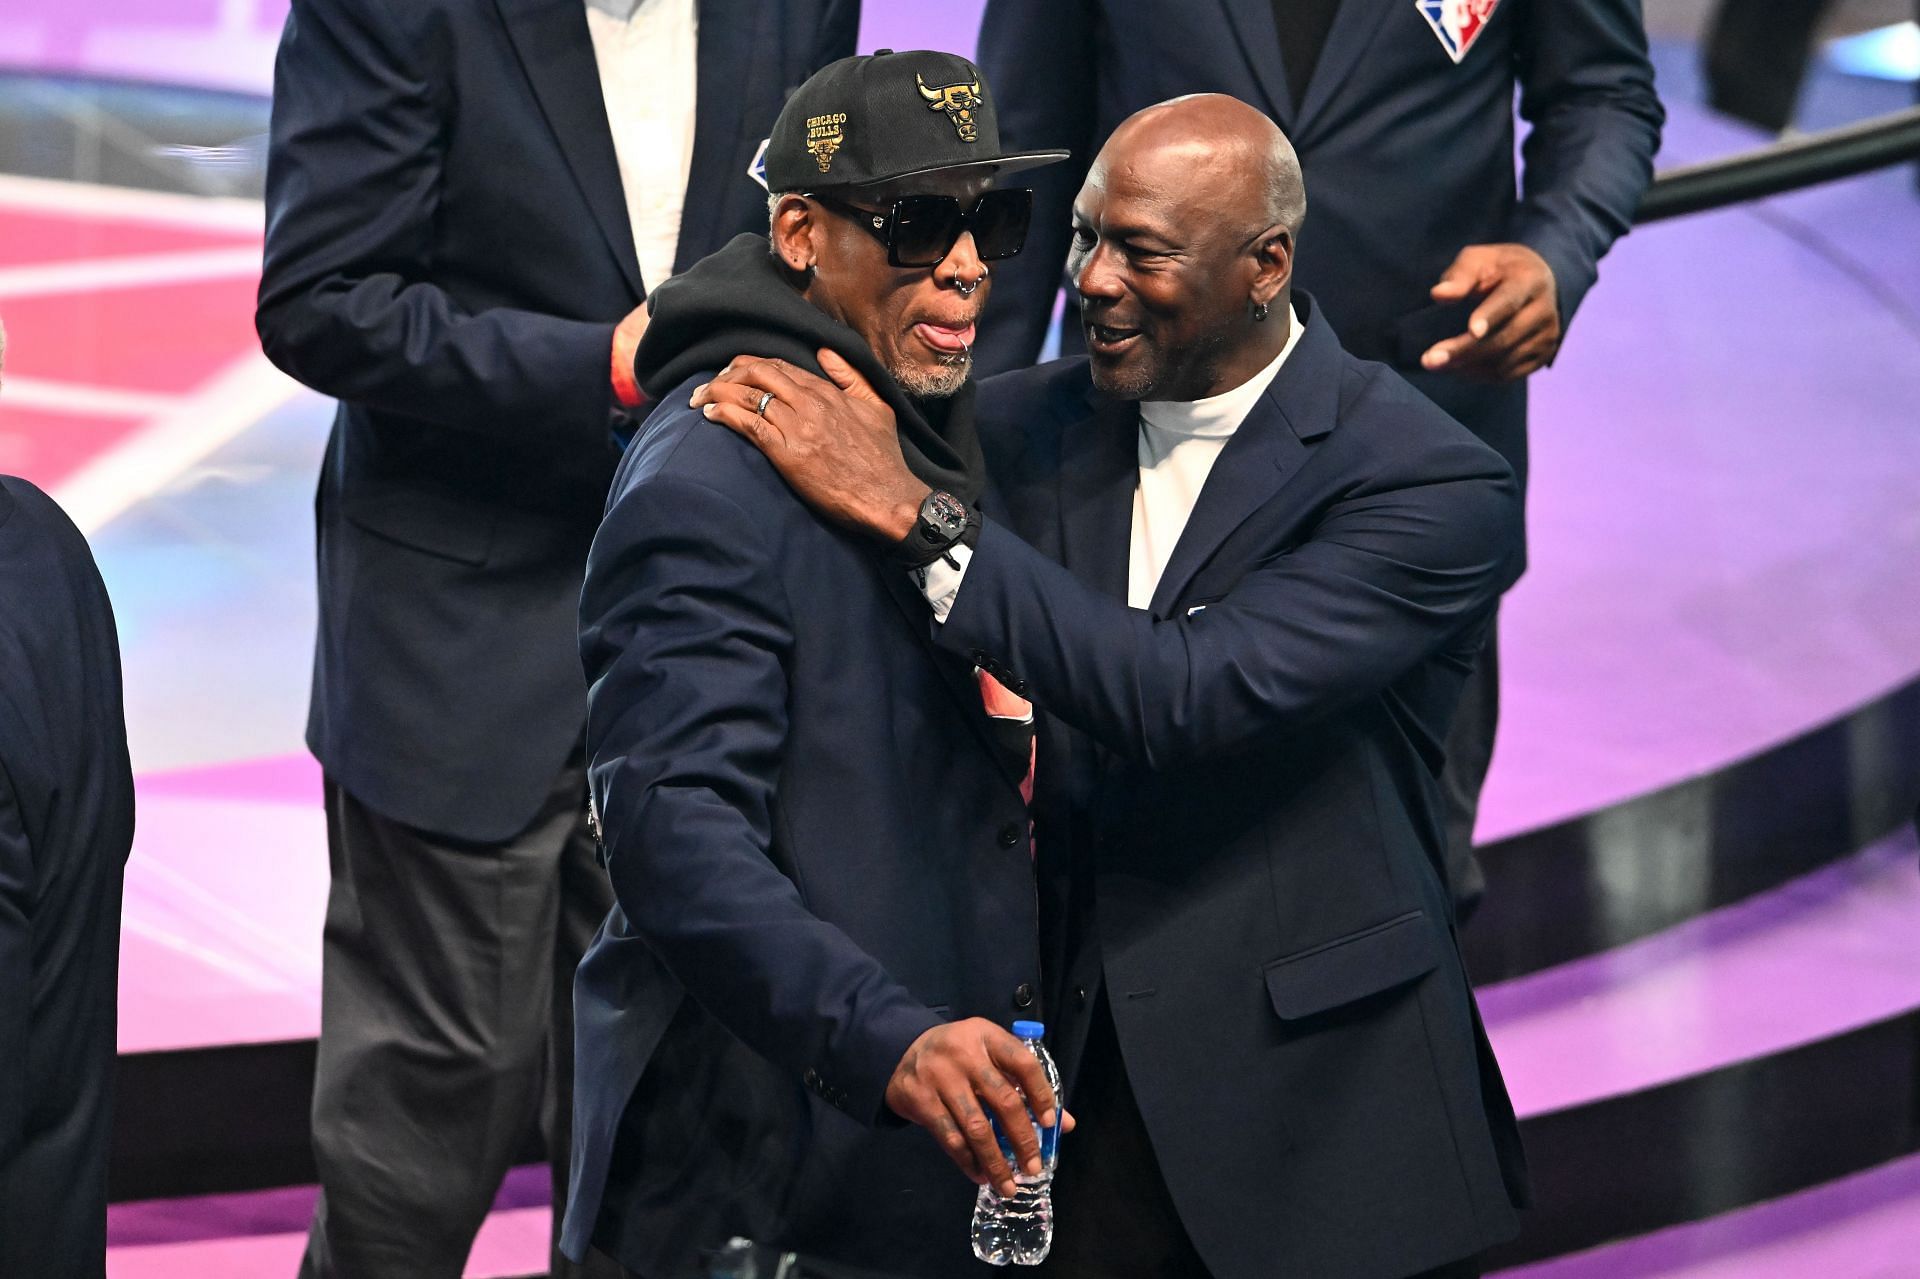 Dennis Rodman, left, and Michael Jordan pose for photos after the introduction of the NBA 75th Anniversary Team during the All-Star Game at on Feb. 20 in Cleveland, Ohio.